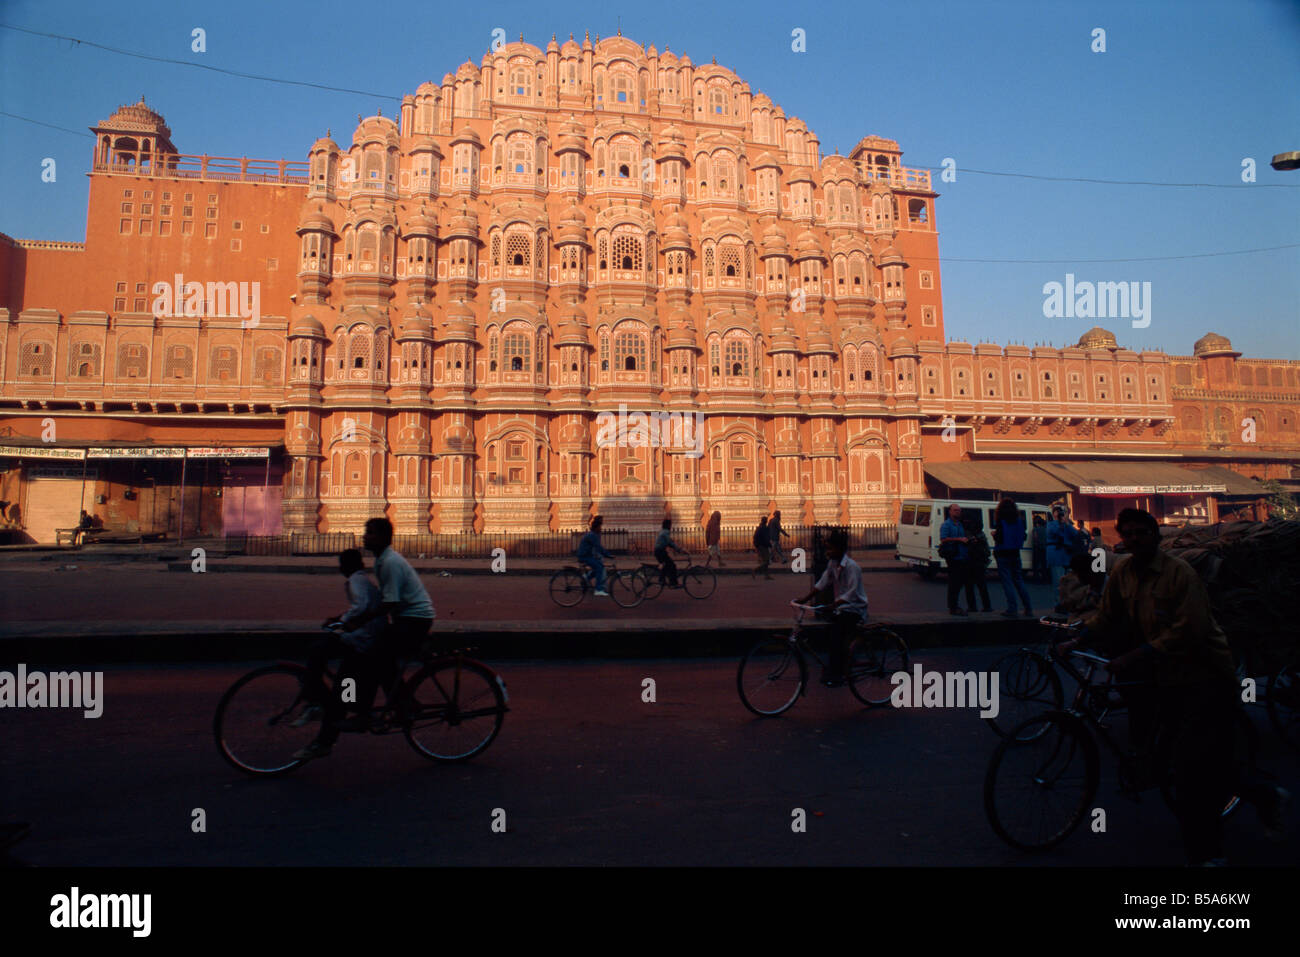 Hawa Mahal Palace of the Winds from where ladies in purdah could look outside Jaipur Rajasthan state India Asia Stock Photo